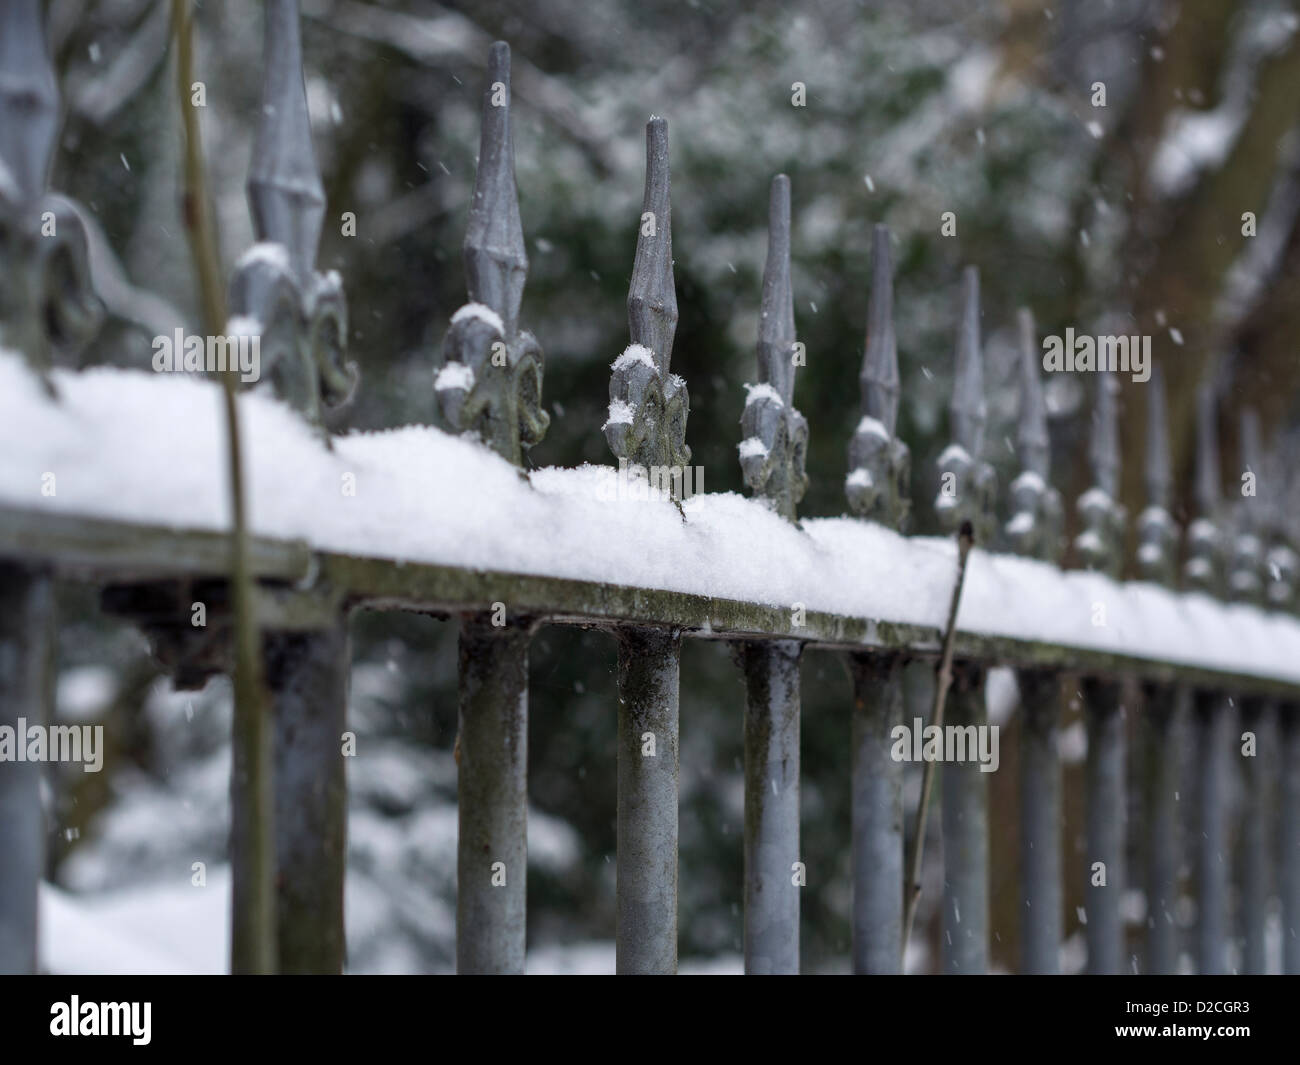 Victorian trefoil iron railings in the snow blurring into the distance Stock Photo